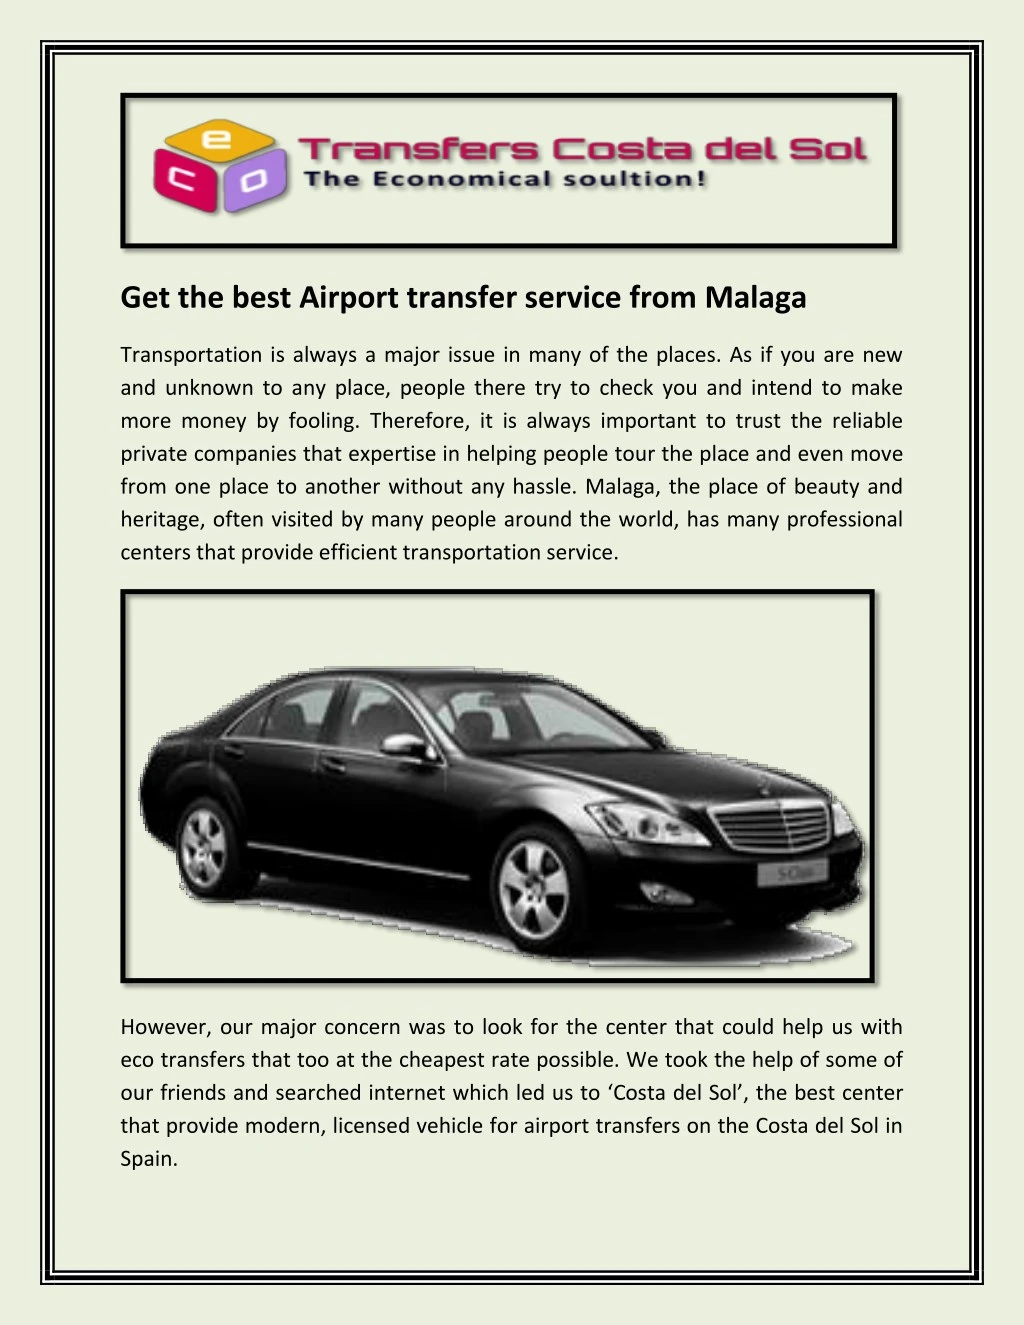 get the best airport transfer service from malaga